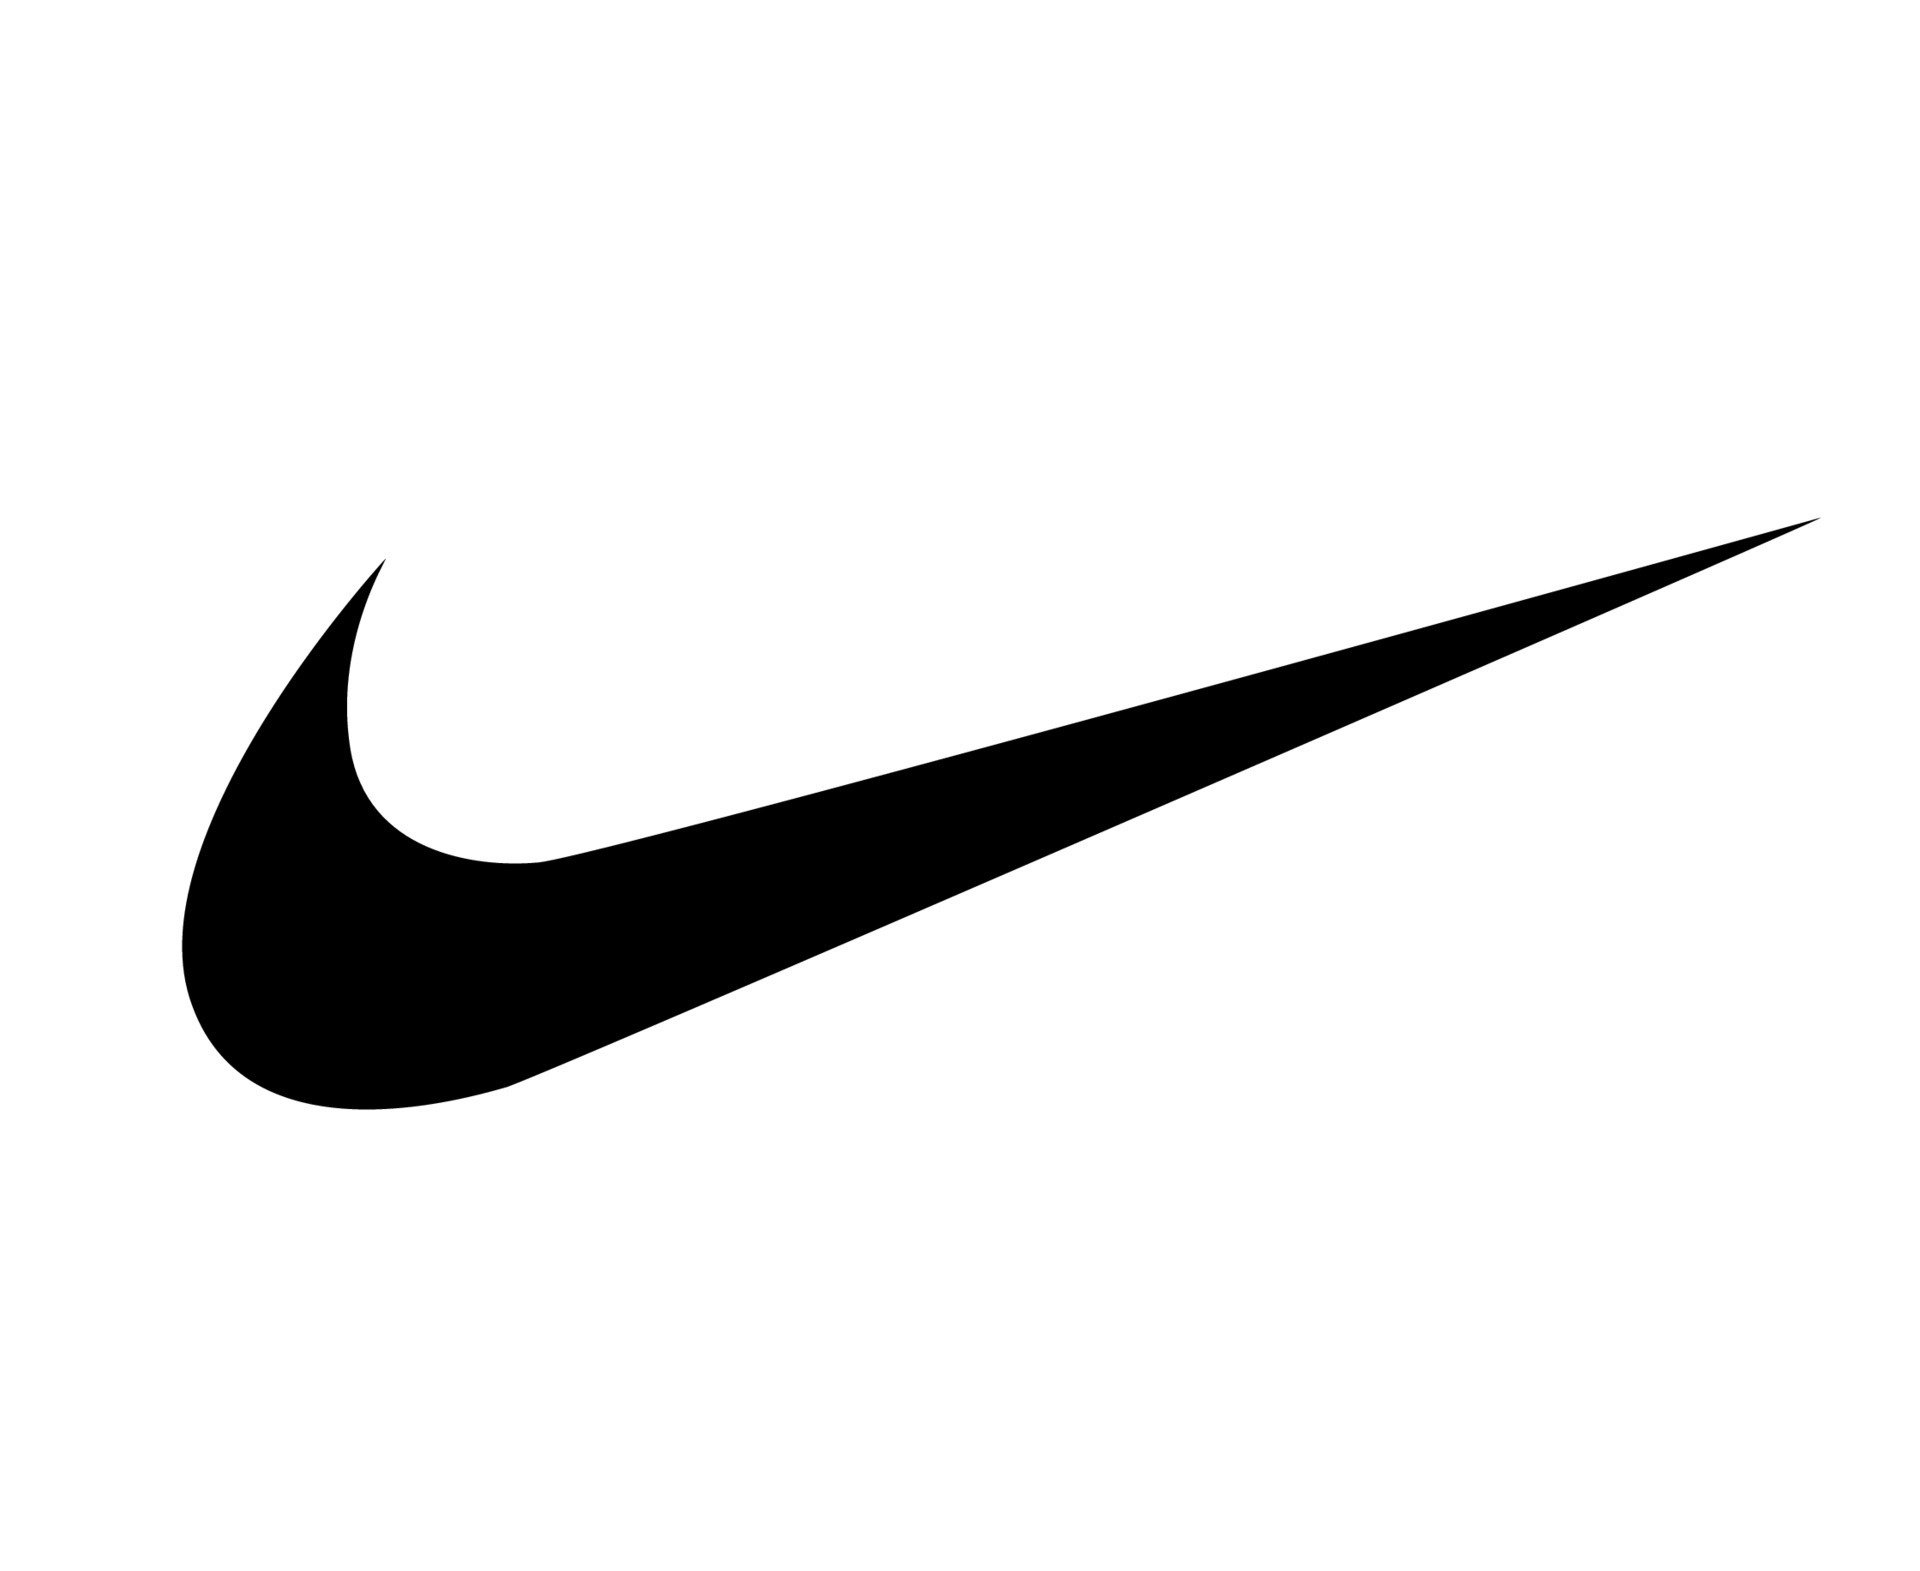 nike-logo-black-clothes-design-icon-abstract-football-illustration-with-white-background-free-vector.jpg